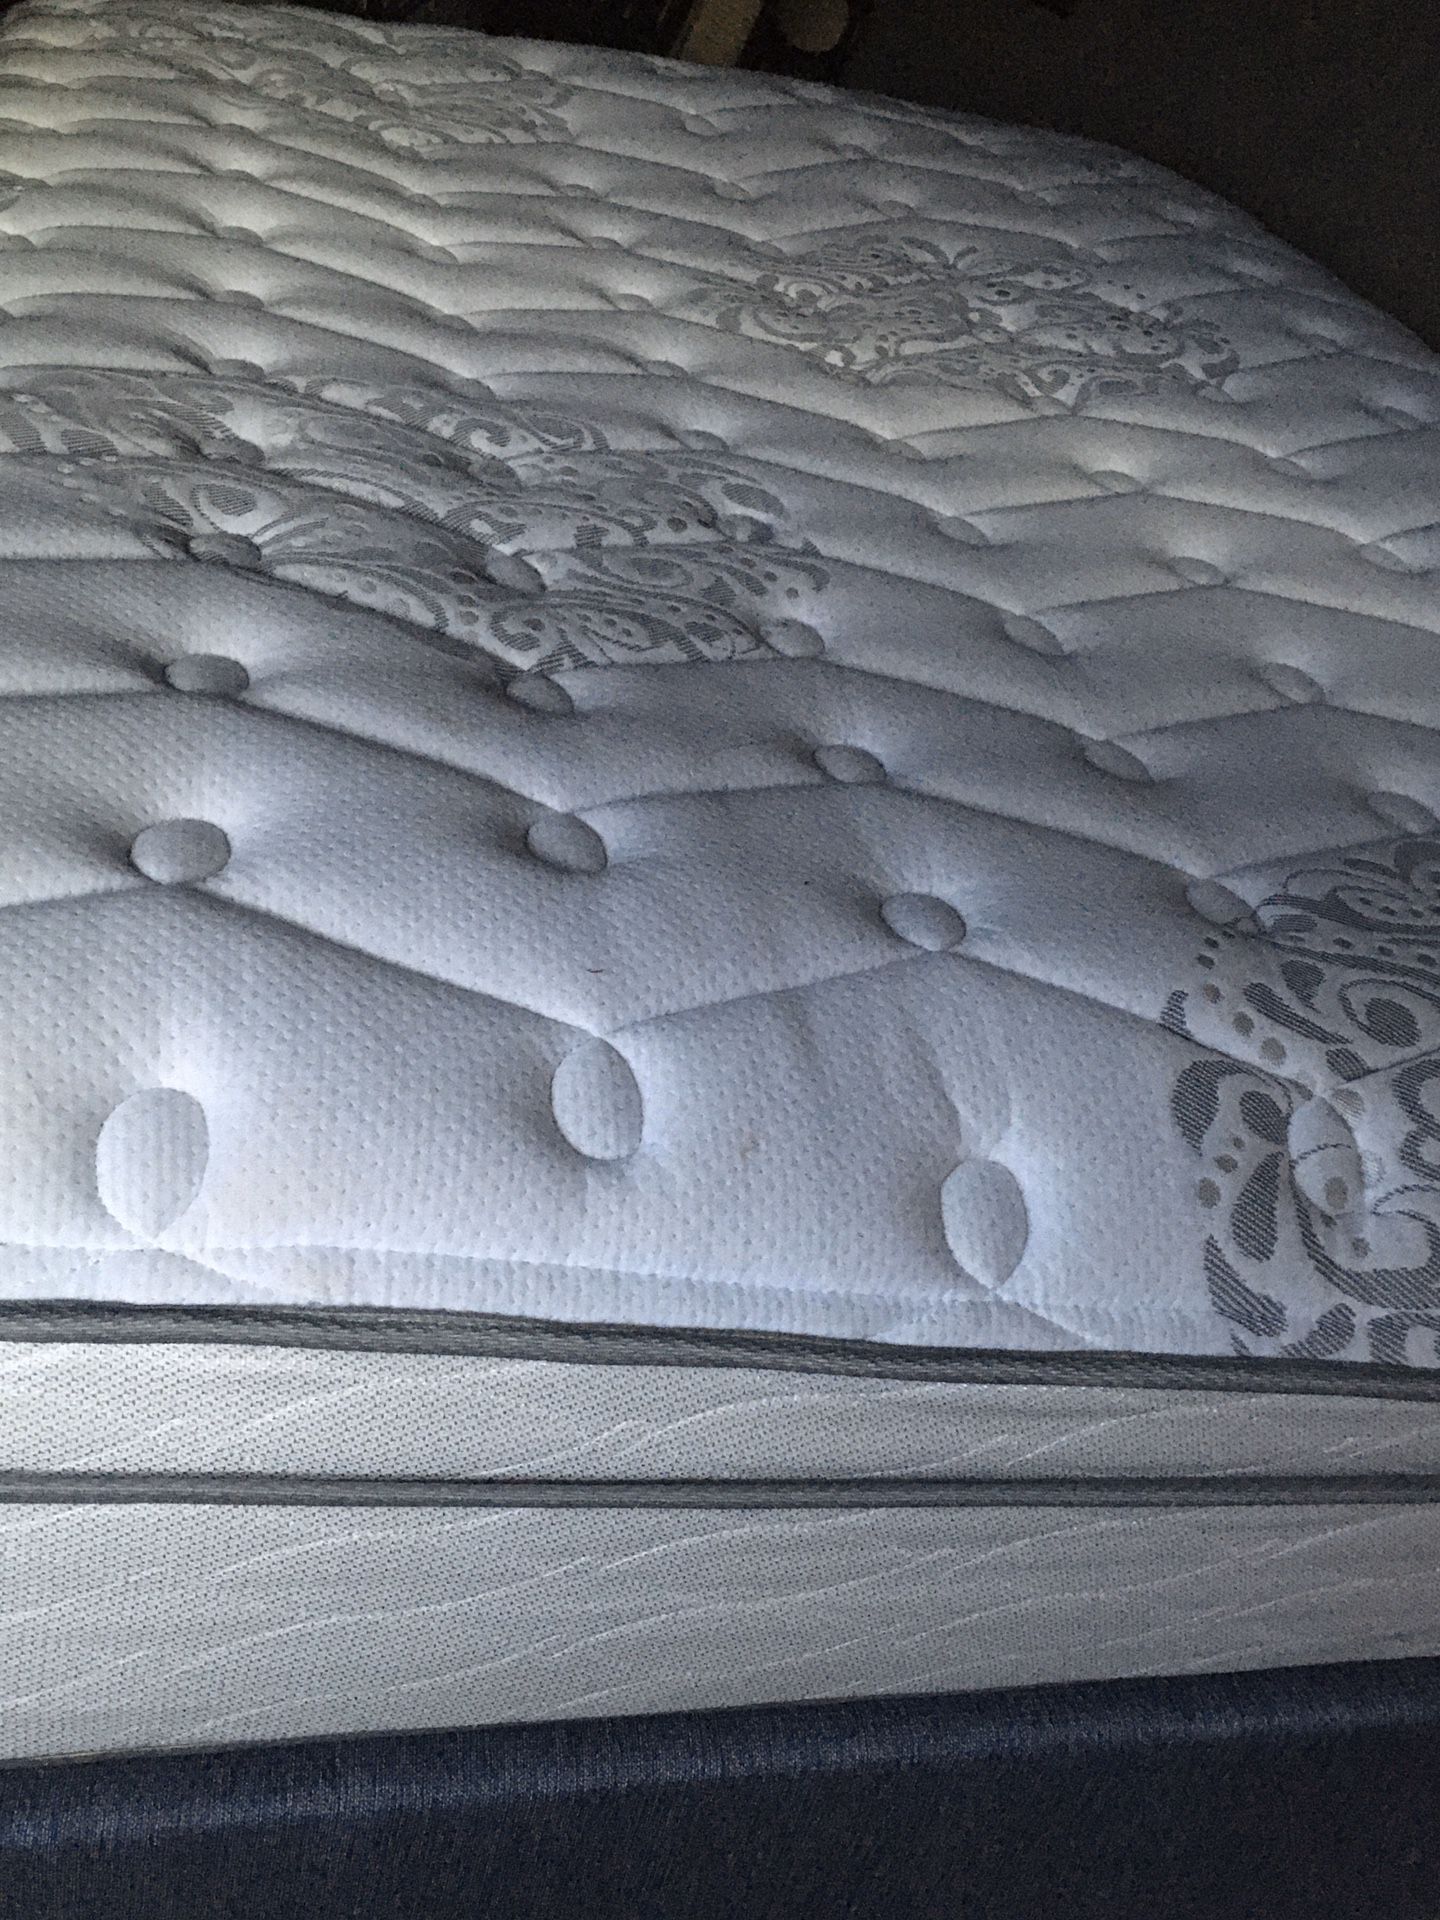 Full size mattress and box spring like new condition.